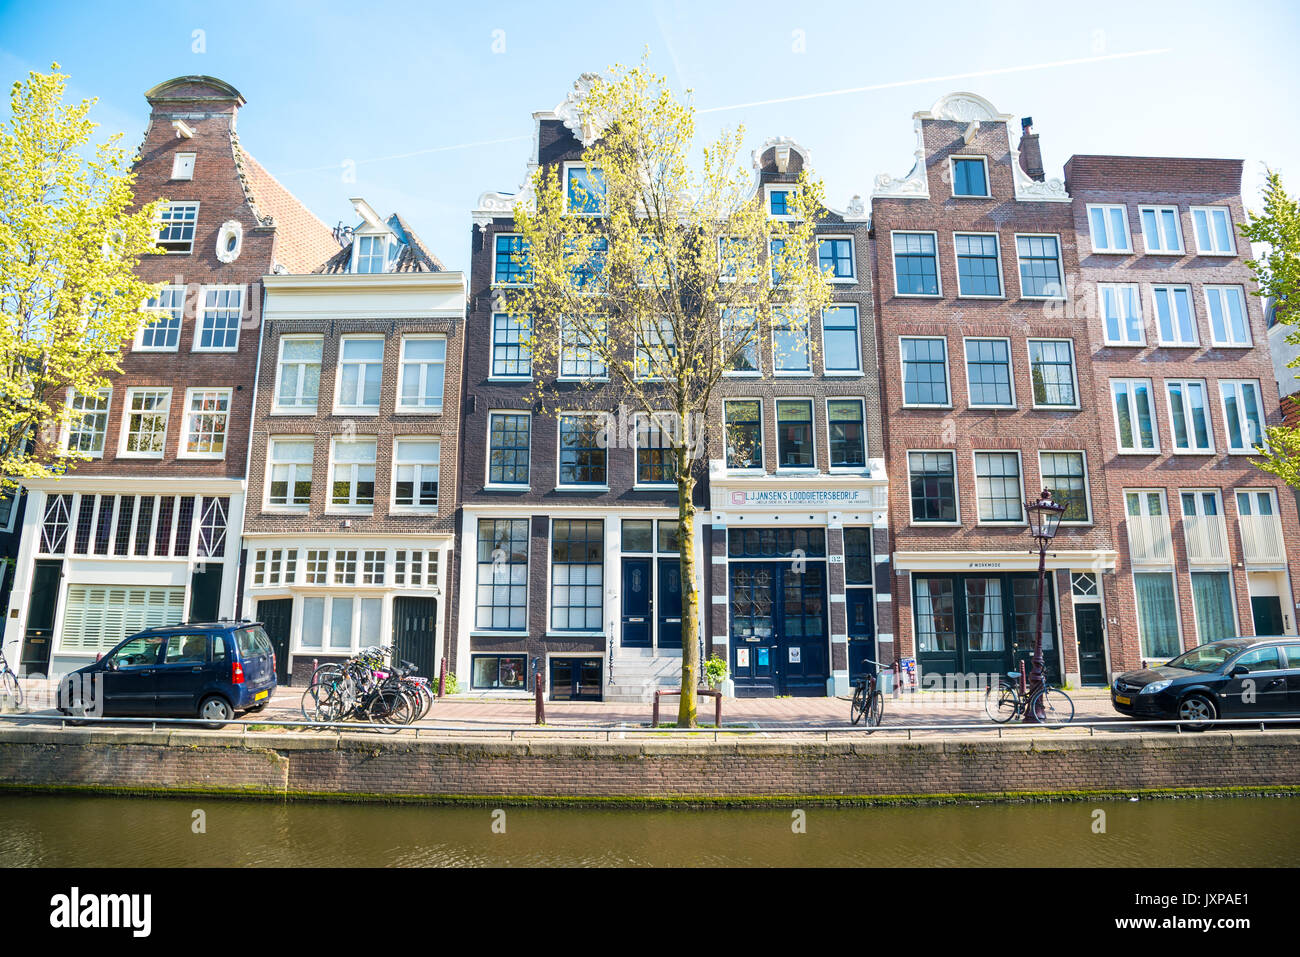 Amsterdam, Netherlands - April 20, 2017: Traditional old buildings in Amsterdam, the Netherlands. Stock Photo